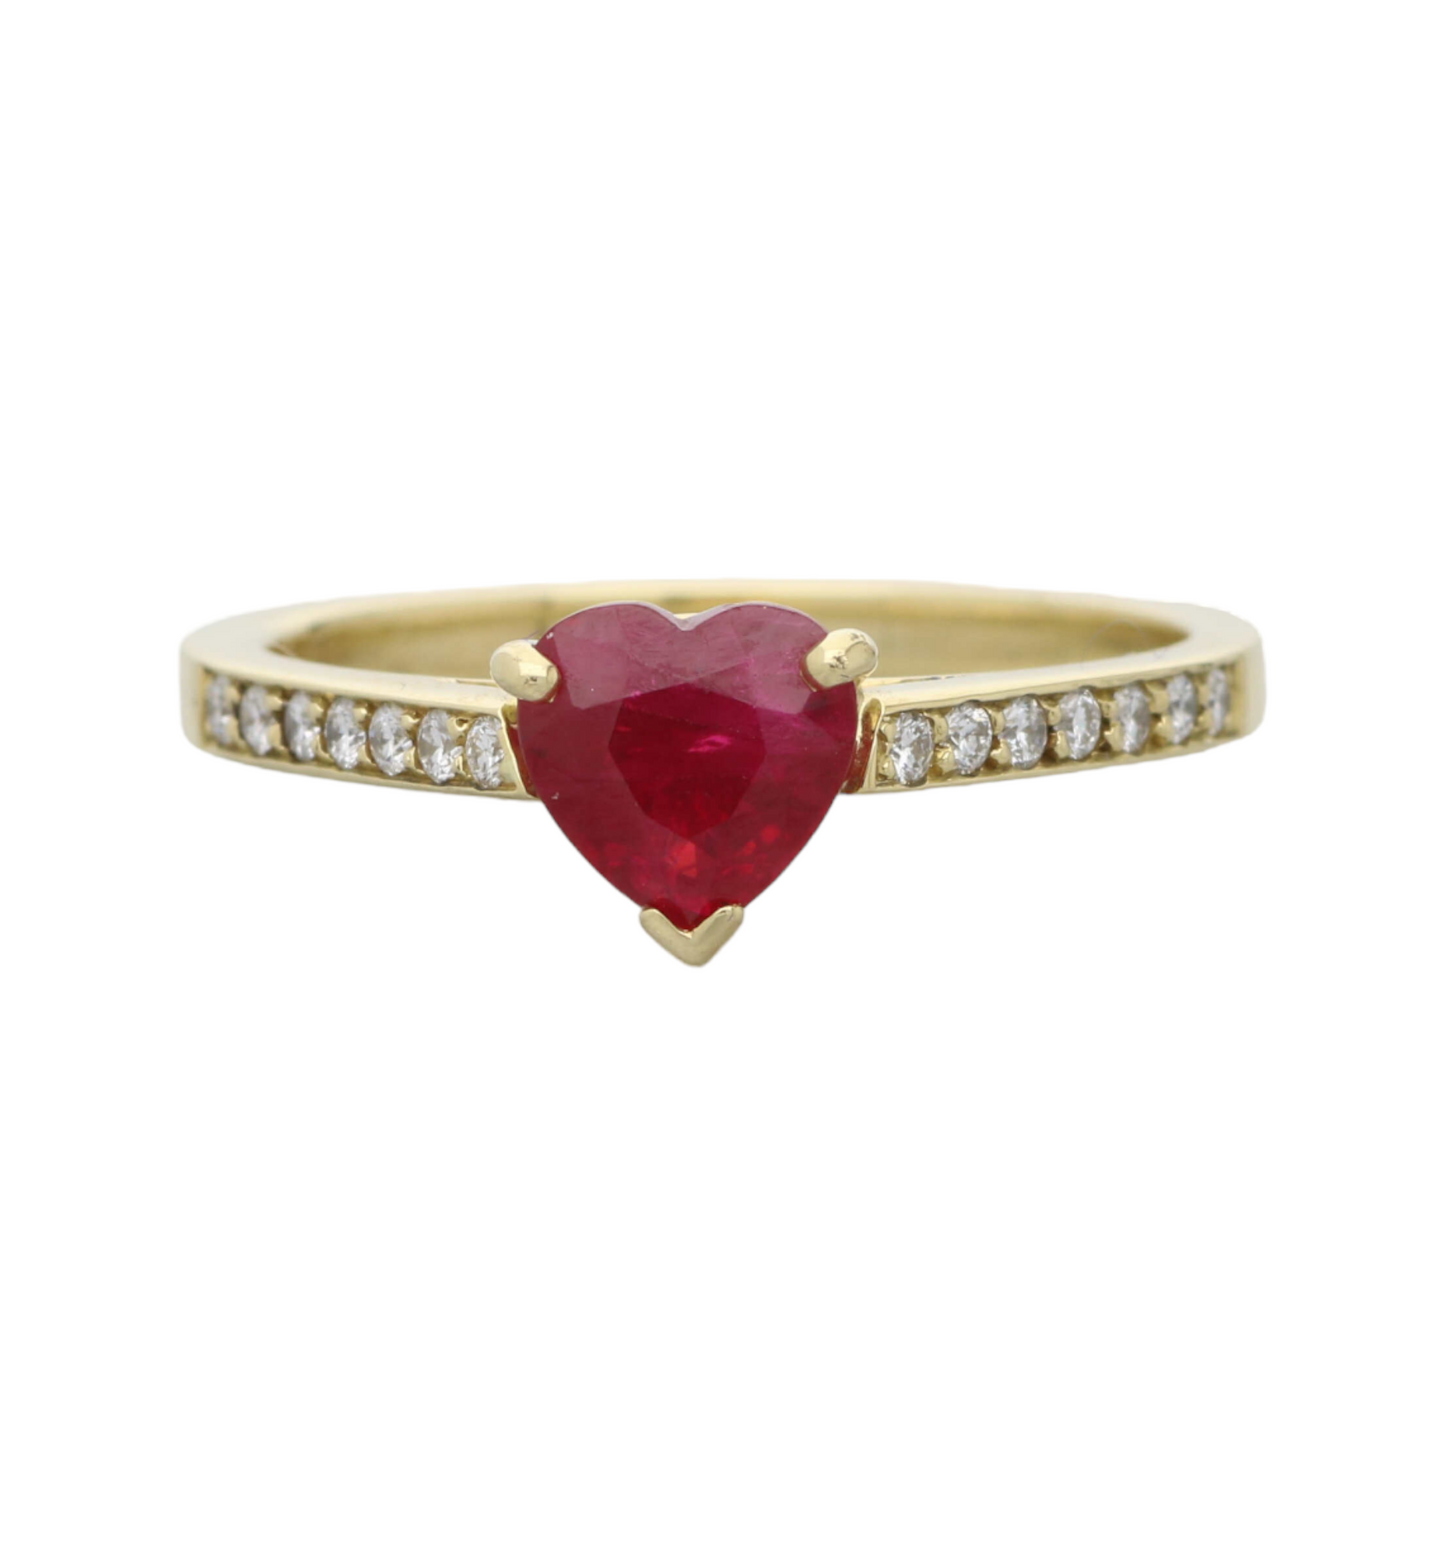 18ct heart-shape ruby and diamond ring